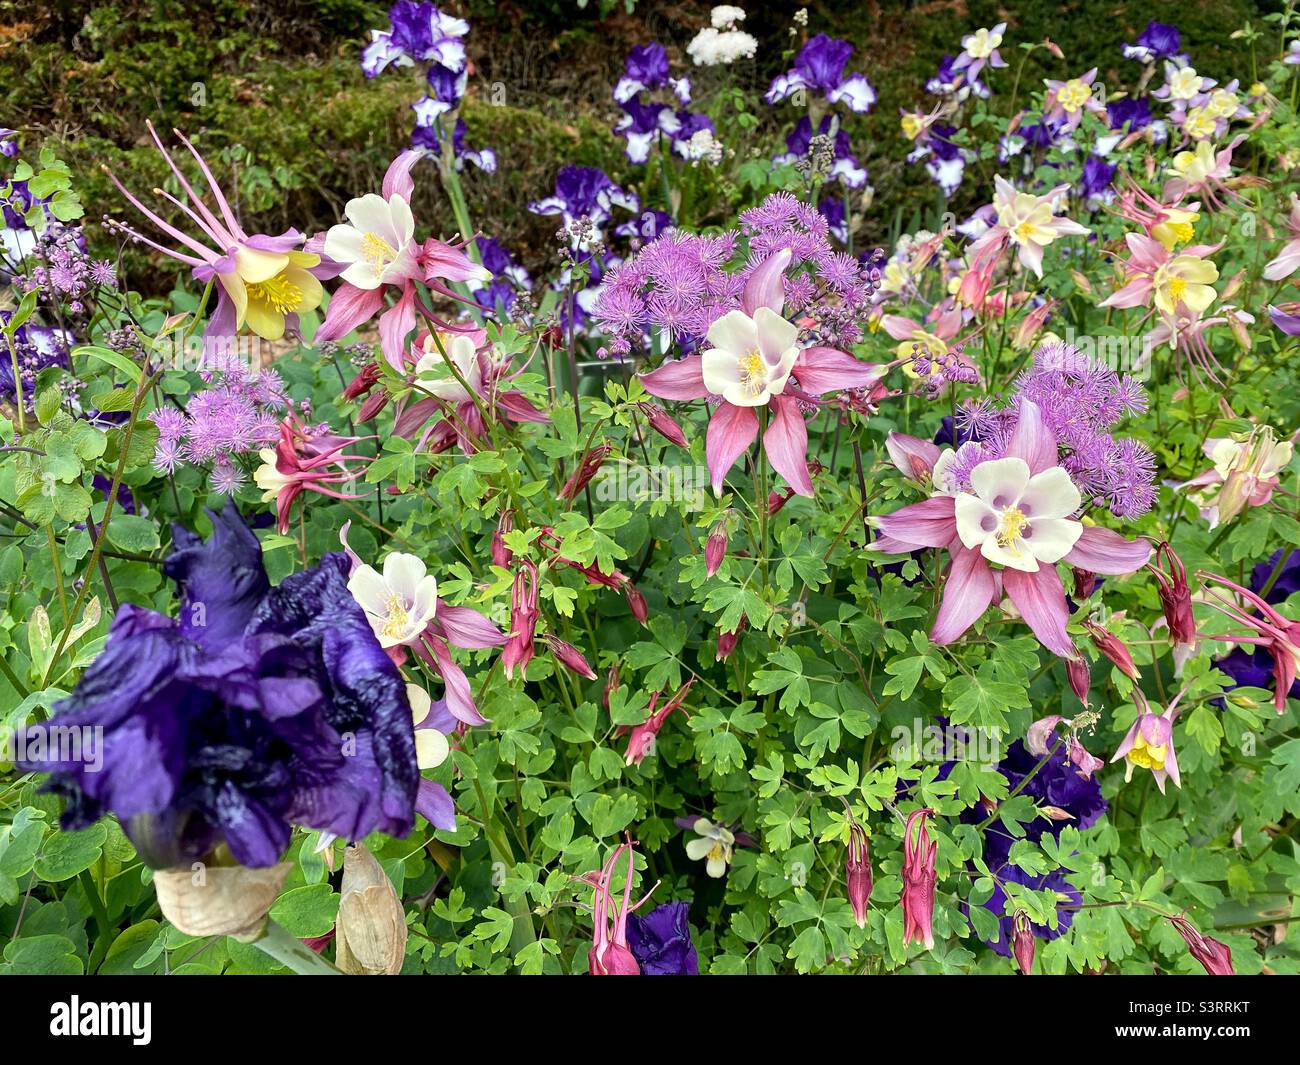 Iris and columbine flowers together in a garden. Stock Photo